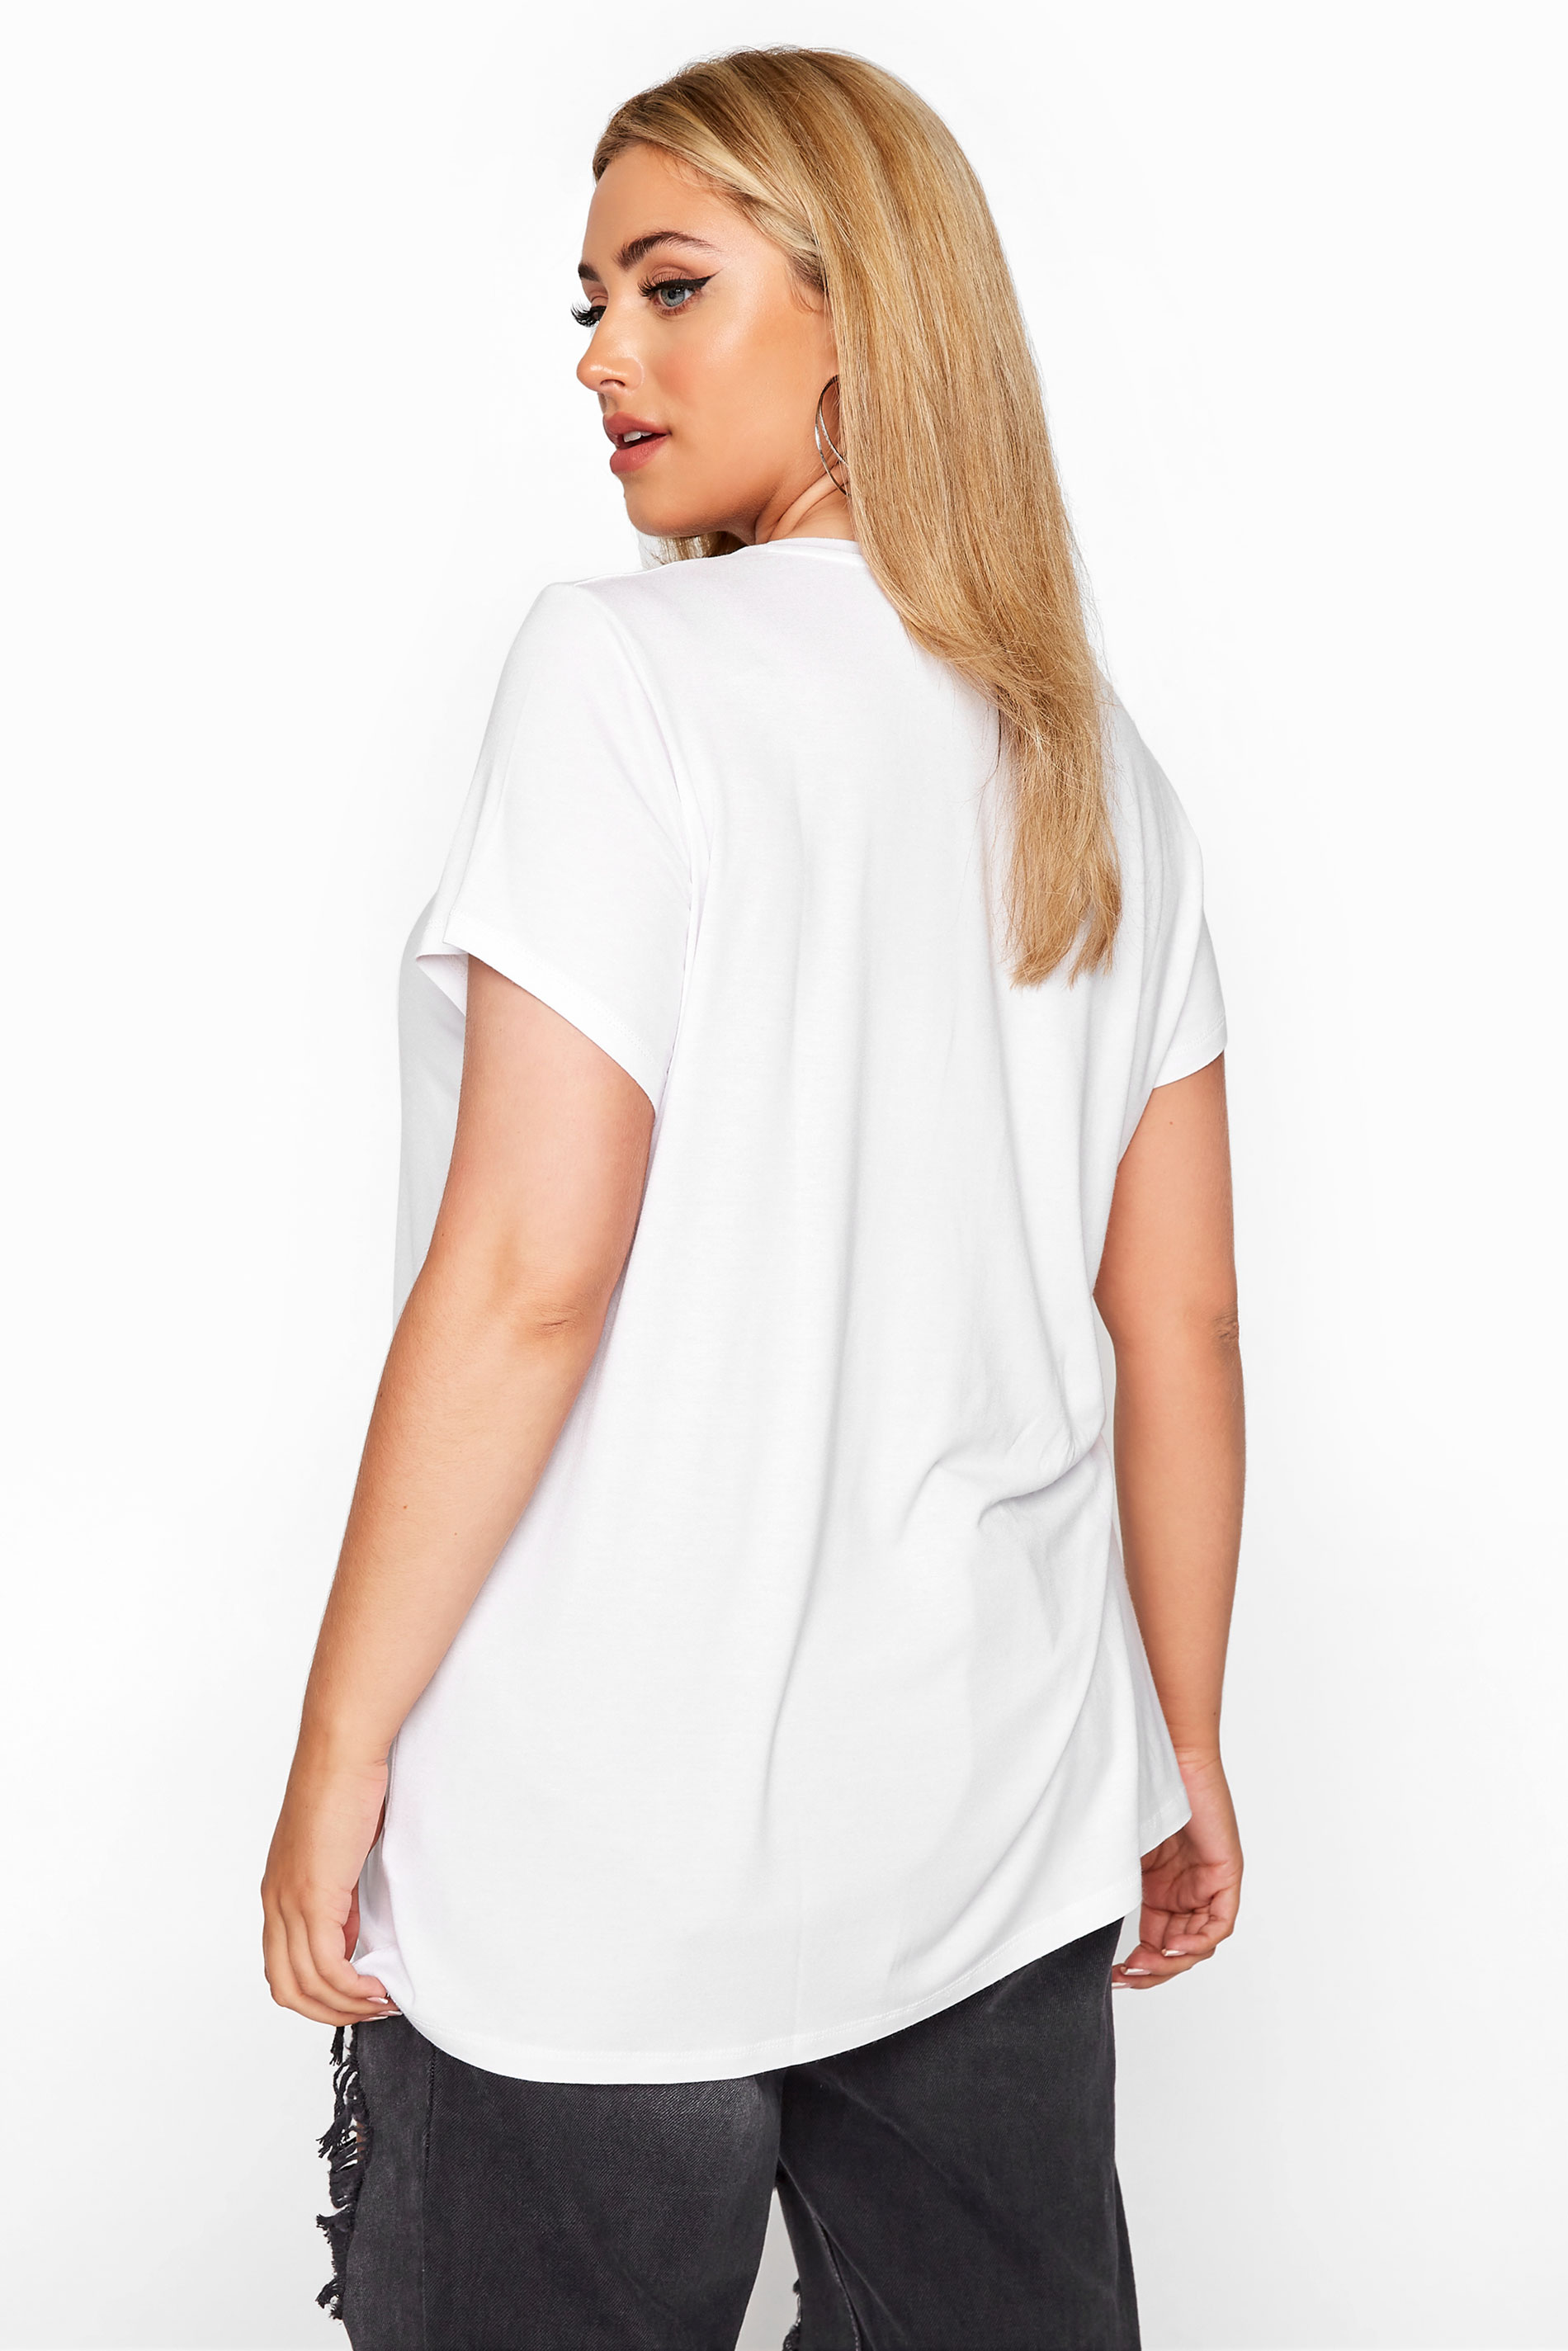 Grande taille  Tops Grande taille  Tops Casual | T-Shirt Blanc Slogan 'Made With Love' - CP04095